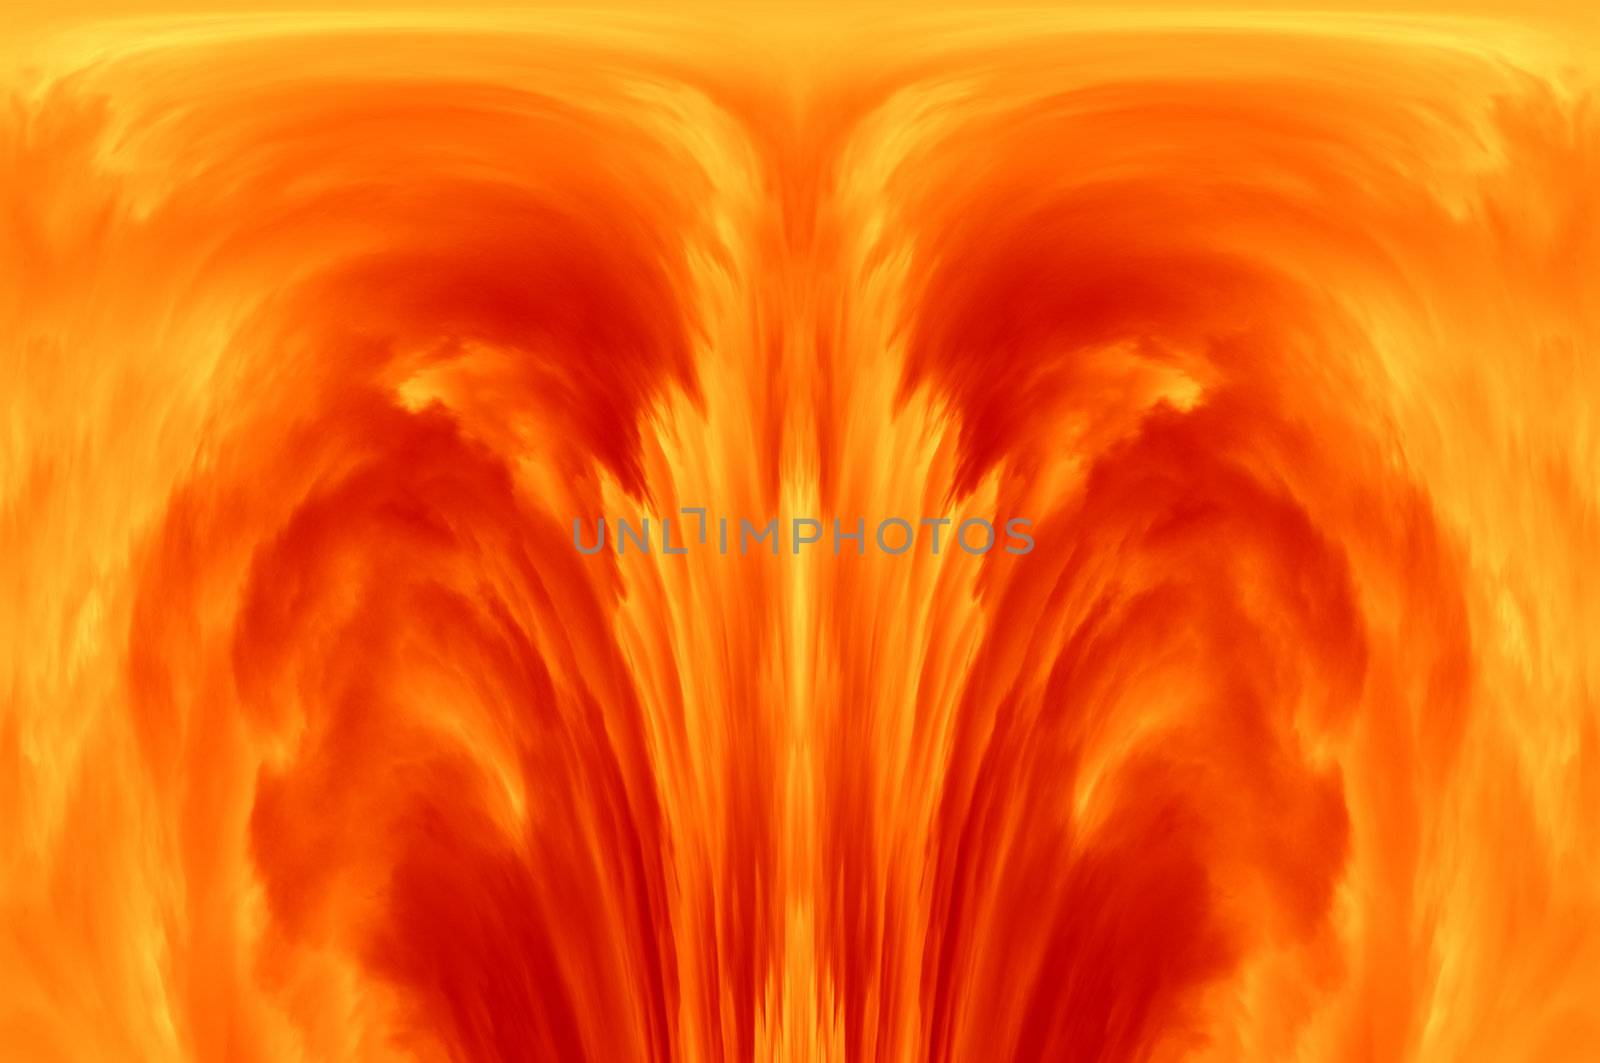 Abstract image of the explosion